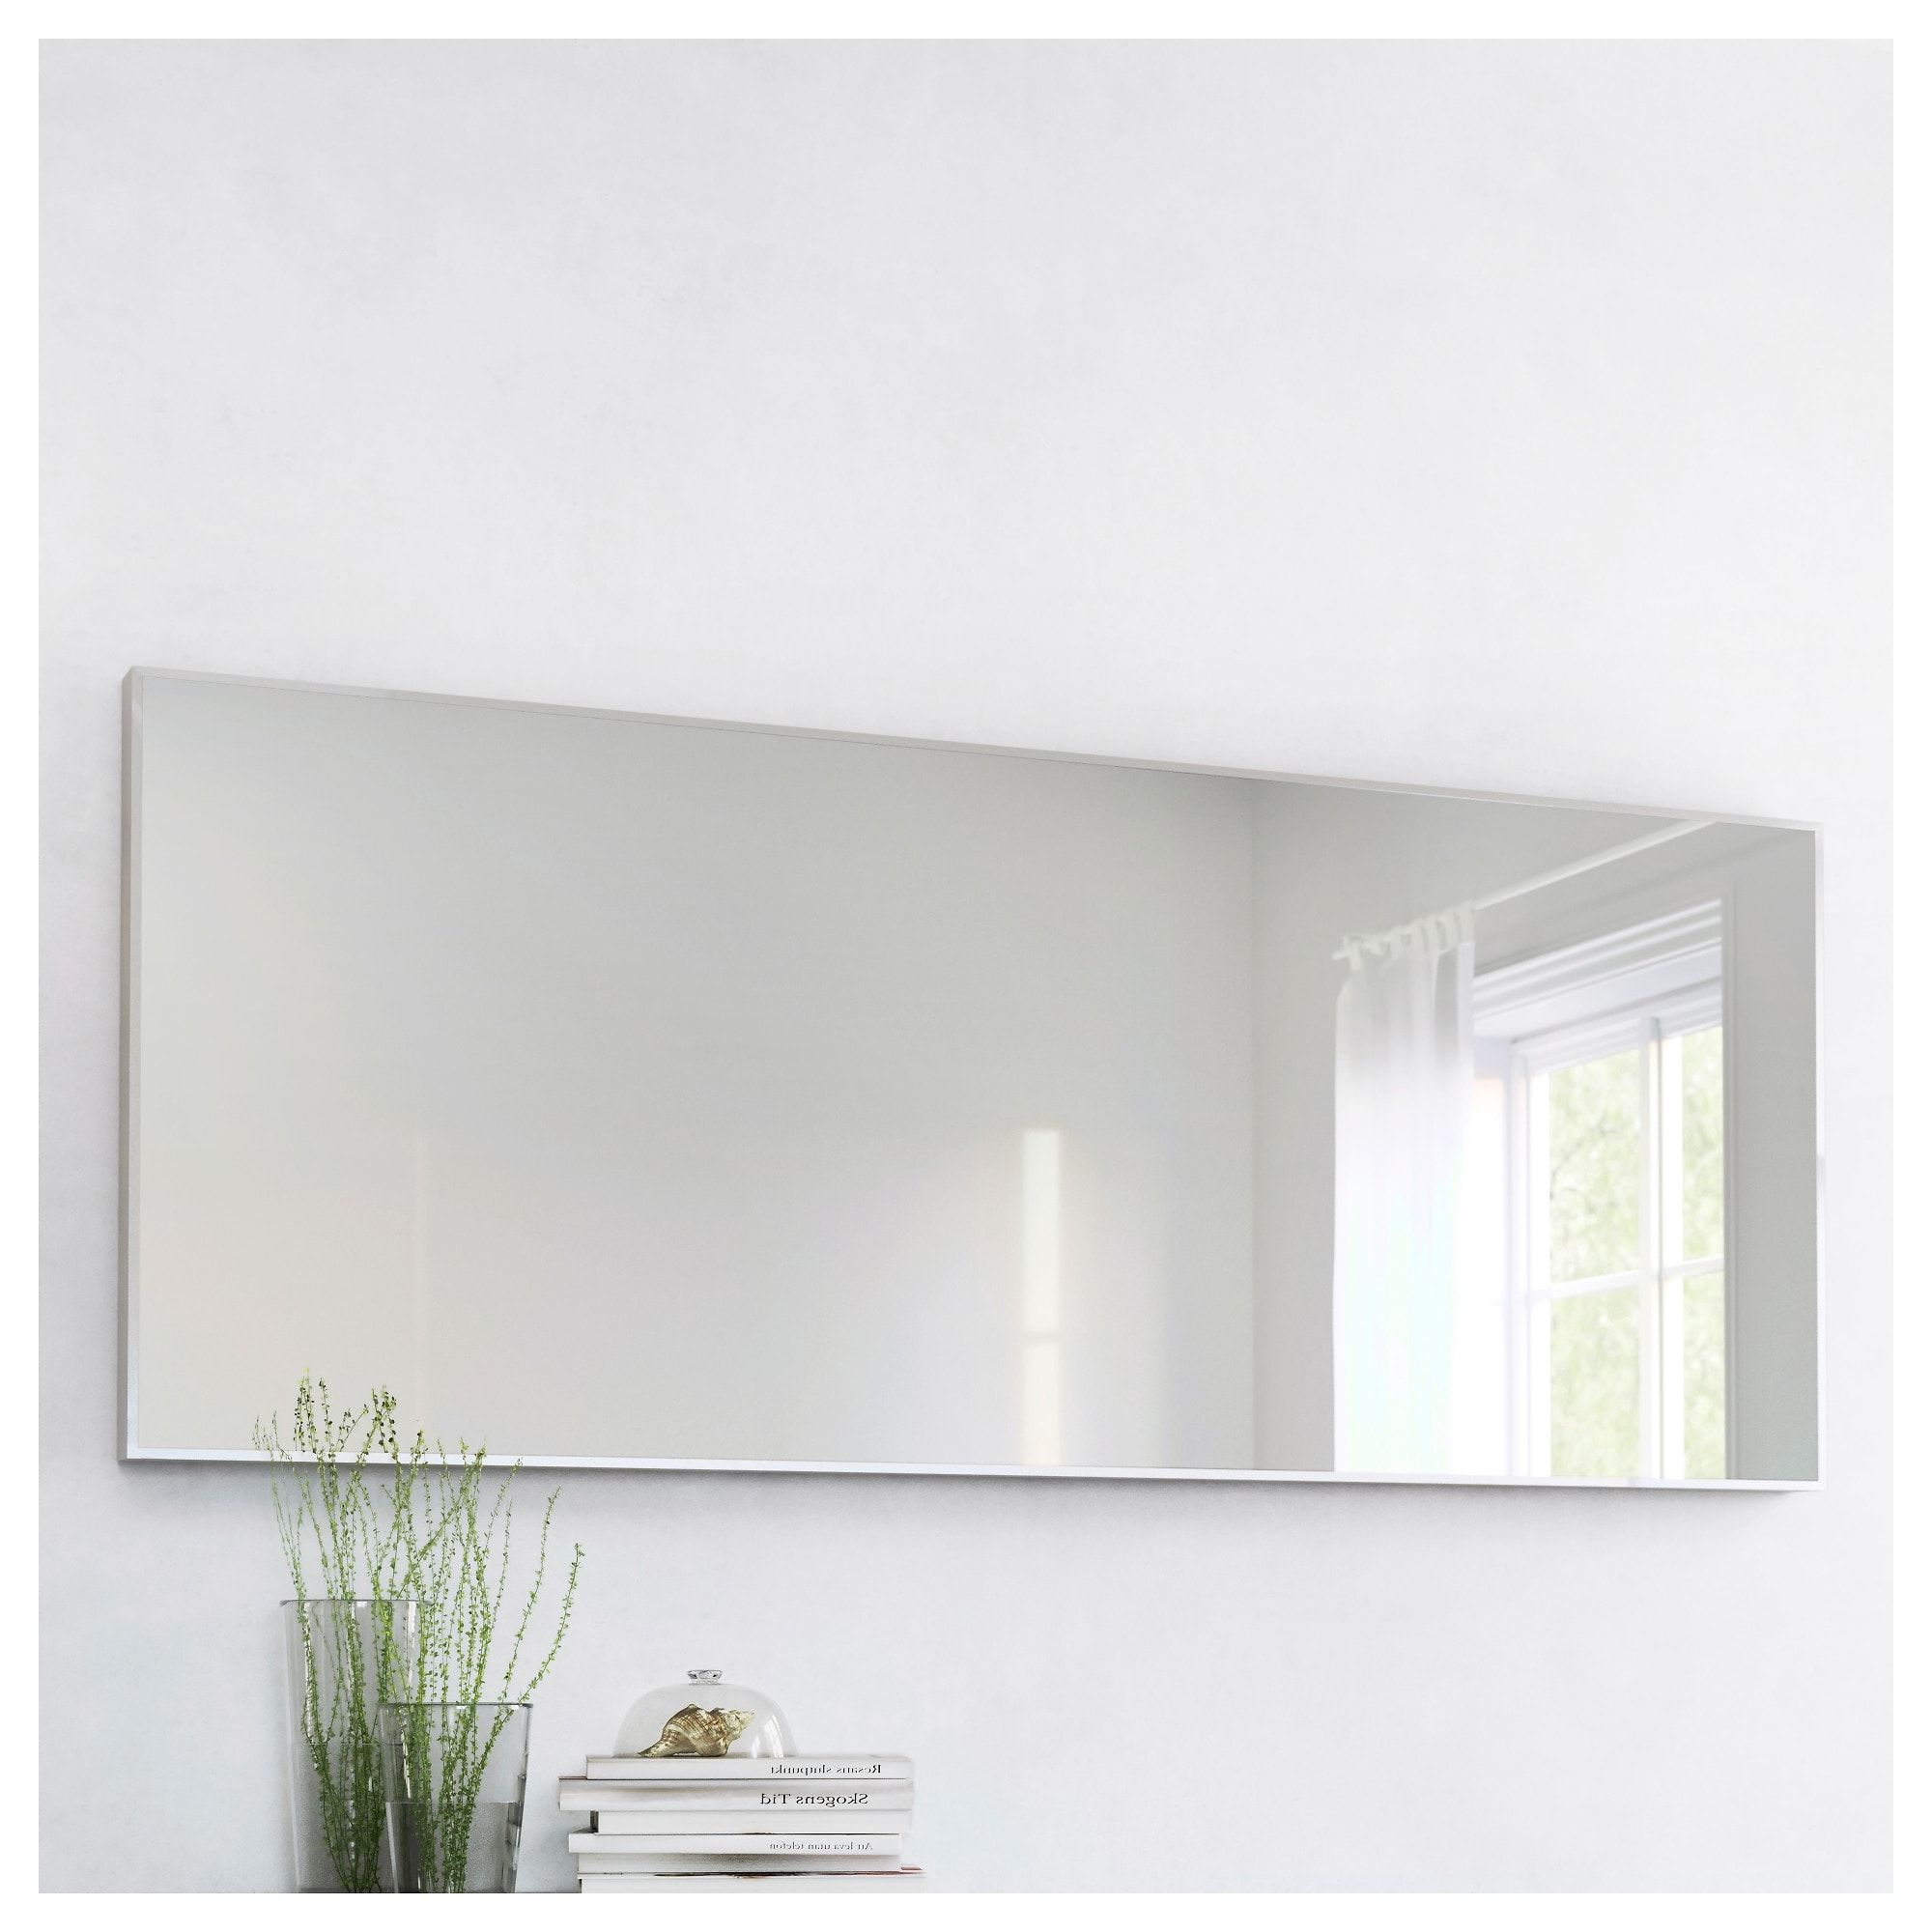 Famous Ikea Oval Wall Mirrors Inside Decor: Sophisticated Hovet Mirror For Home Design Ideas (View 19 of 20)